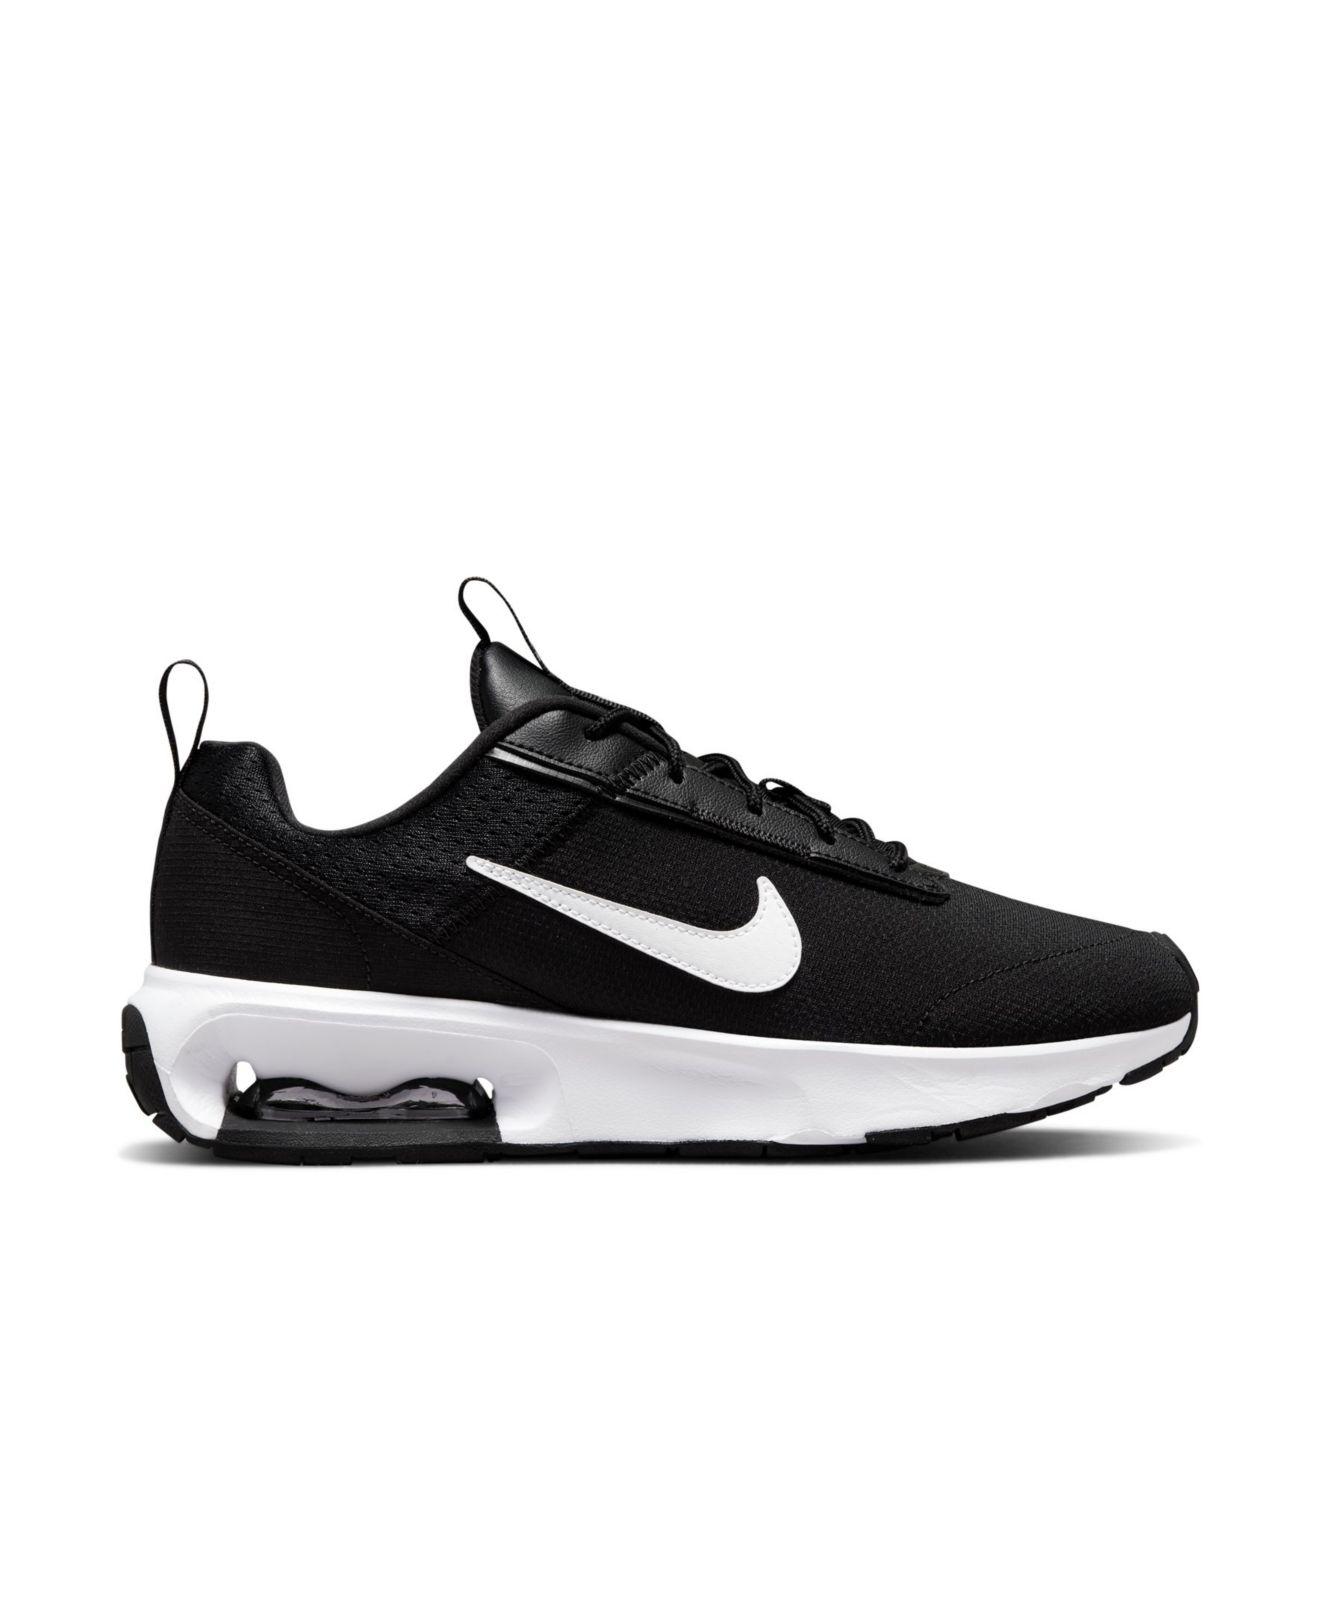 Nike Synthetic Air Max Interlock 75 Light Casual Sneakers From Finish Line  in Black, White (White) | Lyst